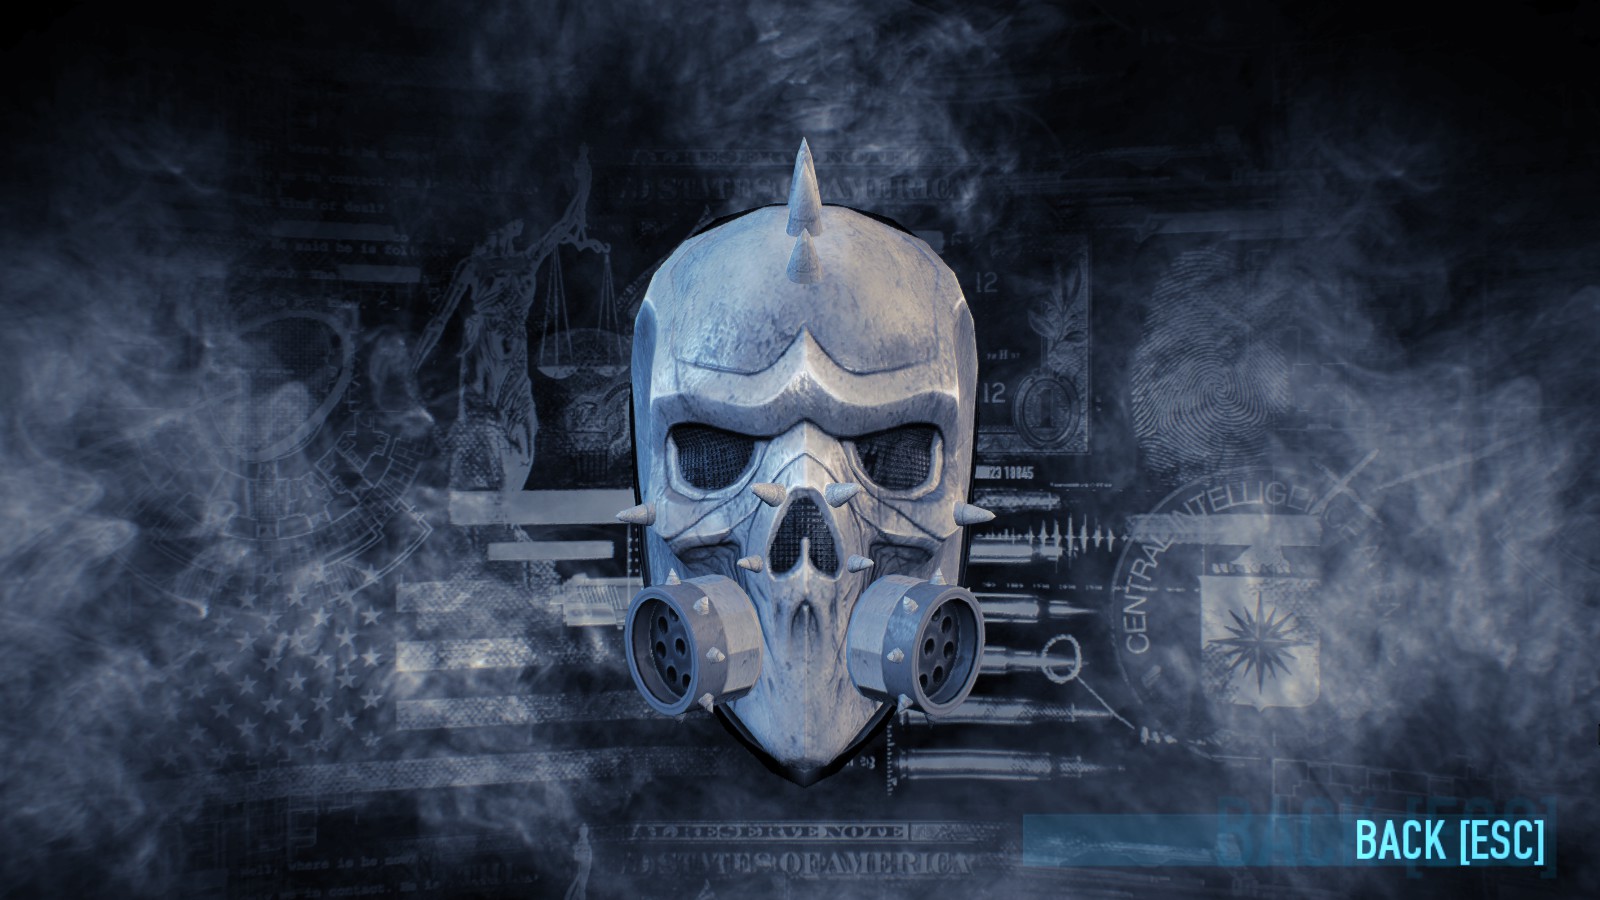 PAYDAY 2: Humble Bundle Mask Pack #1 (Steam)